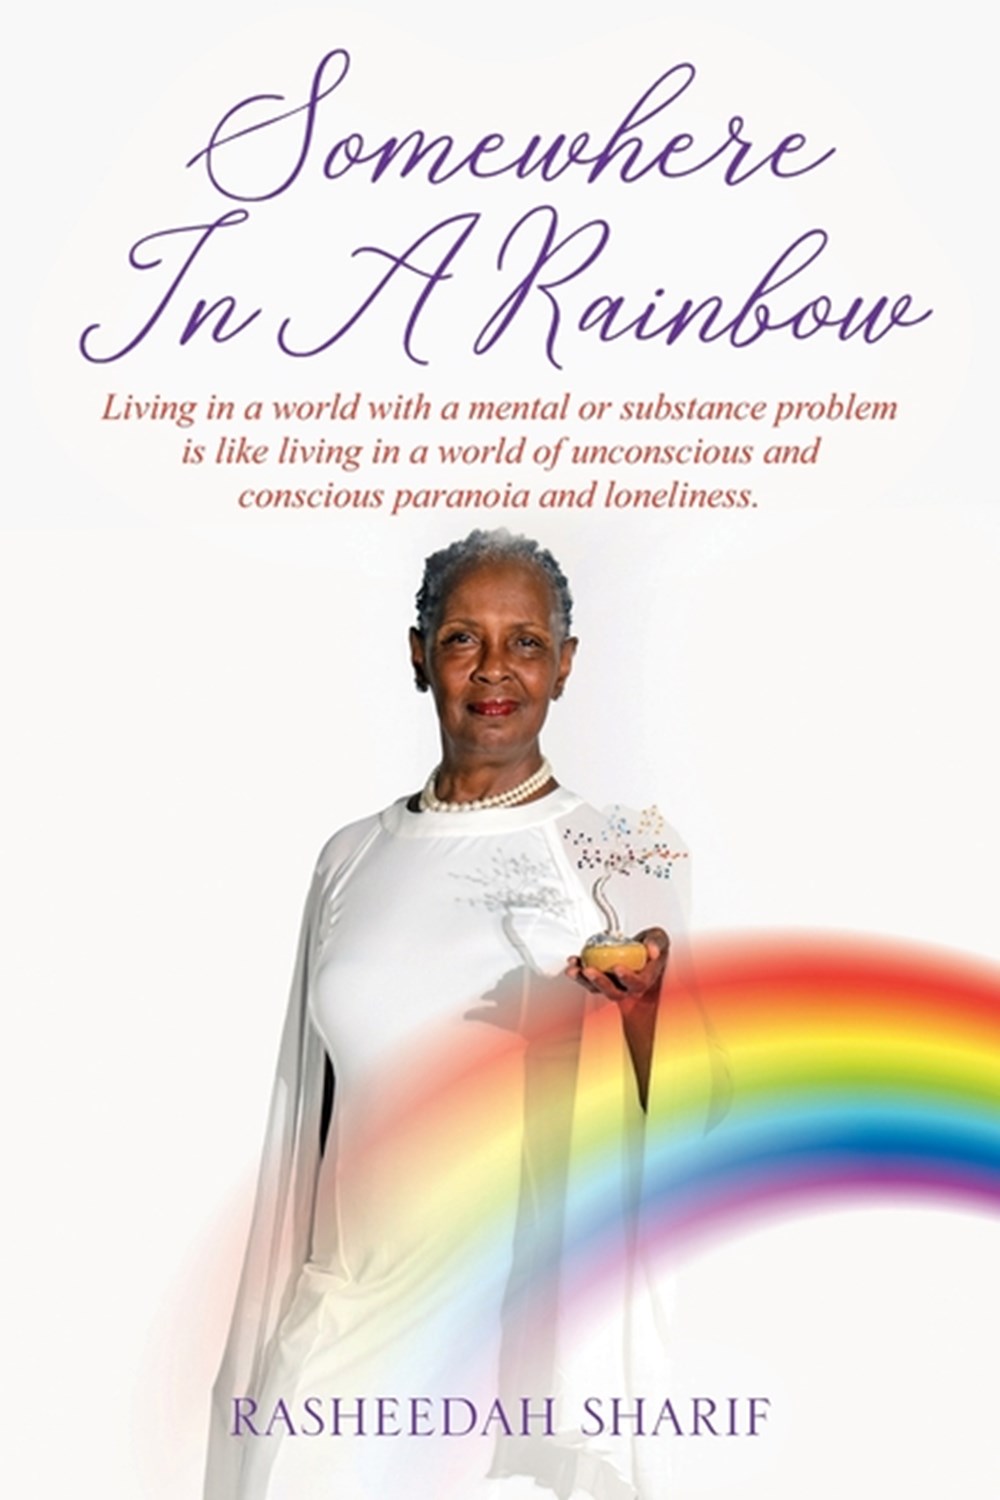 Somewhere In A Rainbow: Living in a world with a mental or substance problem is like living in a wor